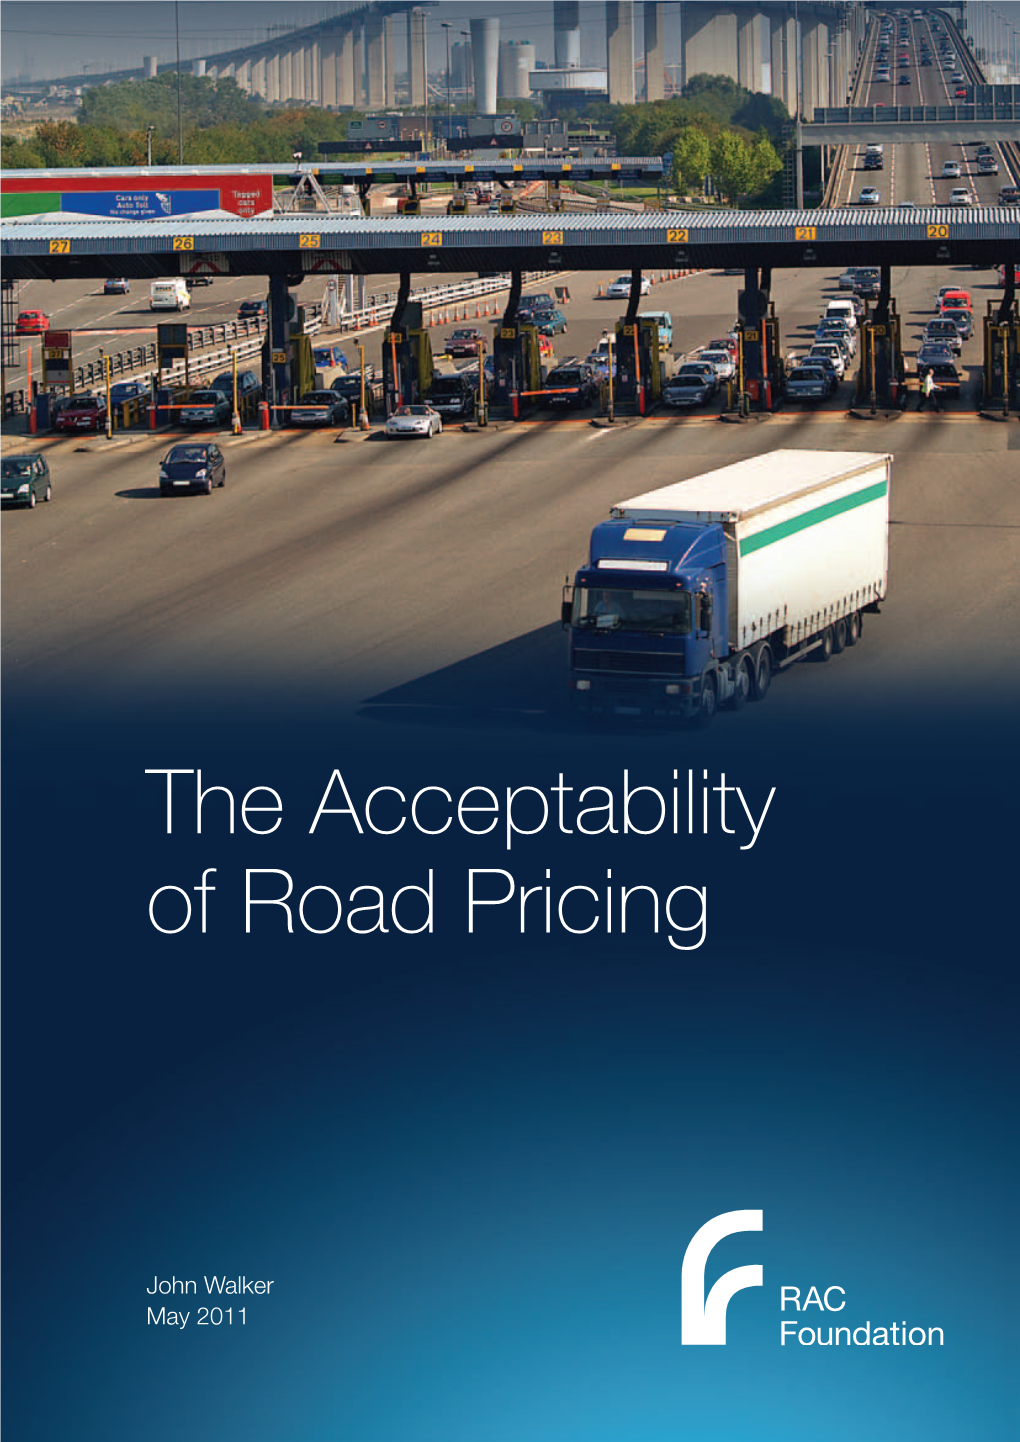 The Acceptability of Road Pricing